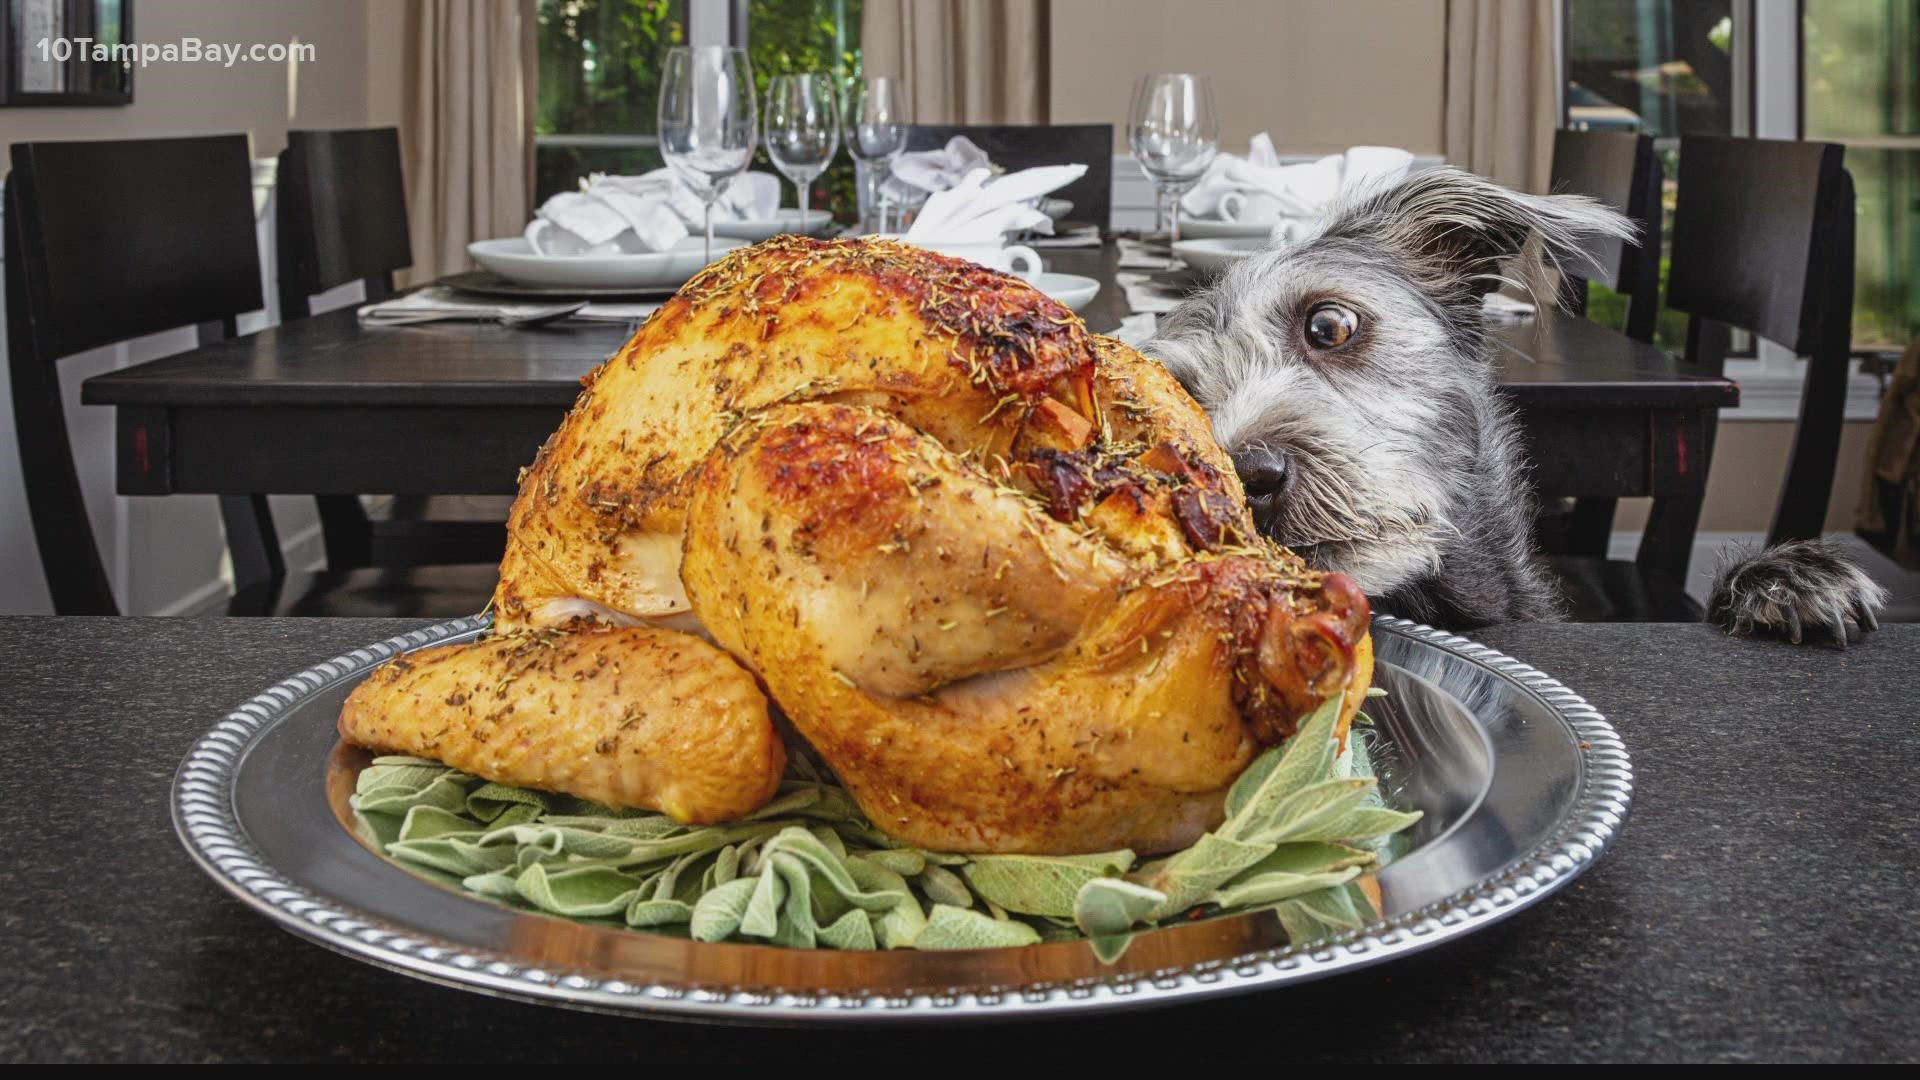 Much of the holiday meal is dangerous for pets because of fats, oils, spices, seasonings and other ingredients that can be toxic to them.